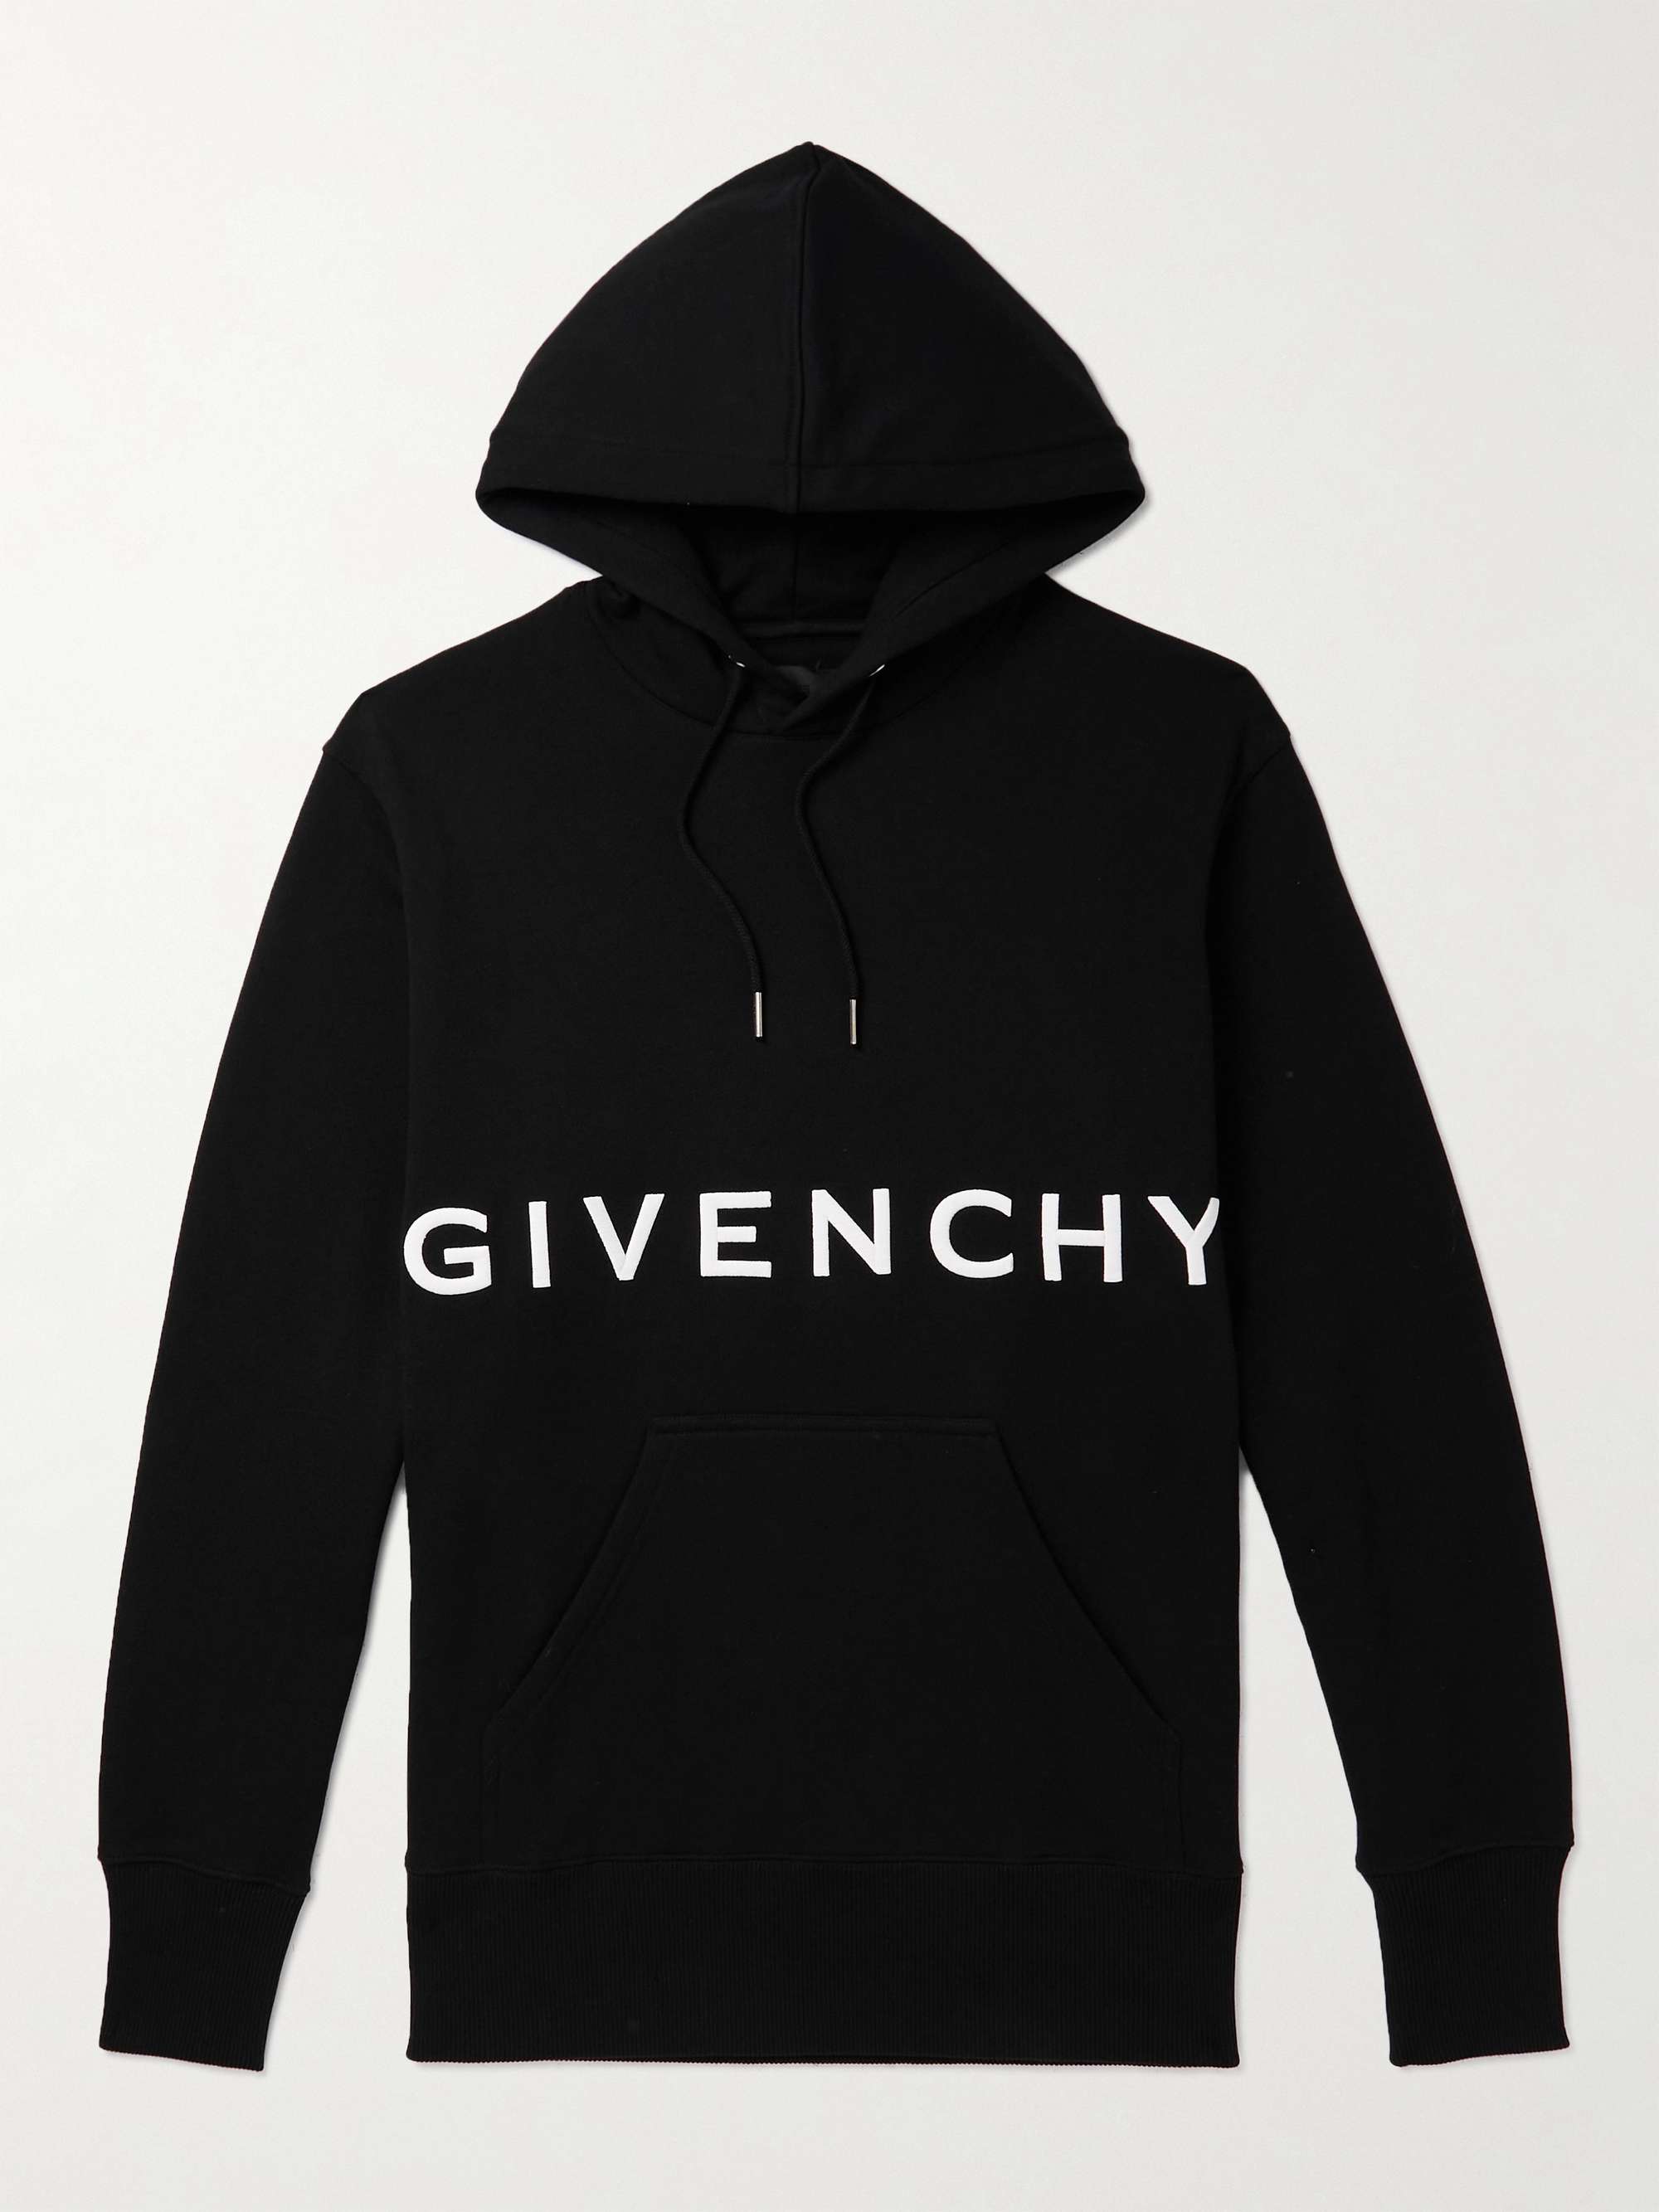 Top 63+ imagen givenchy hoodie